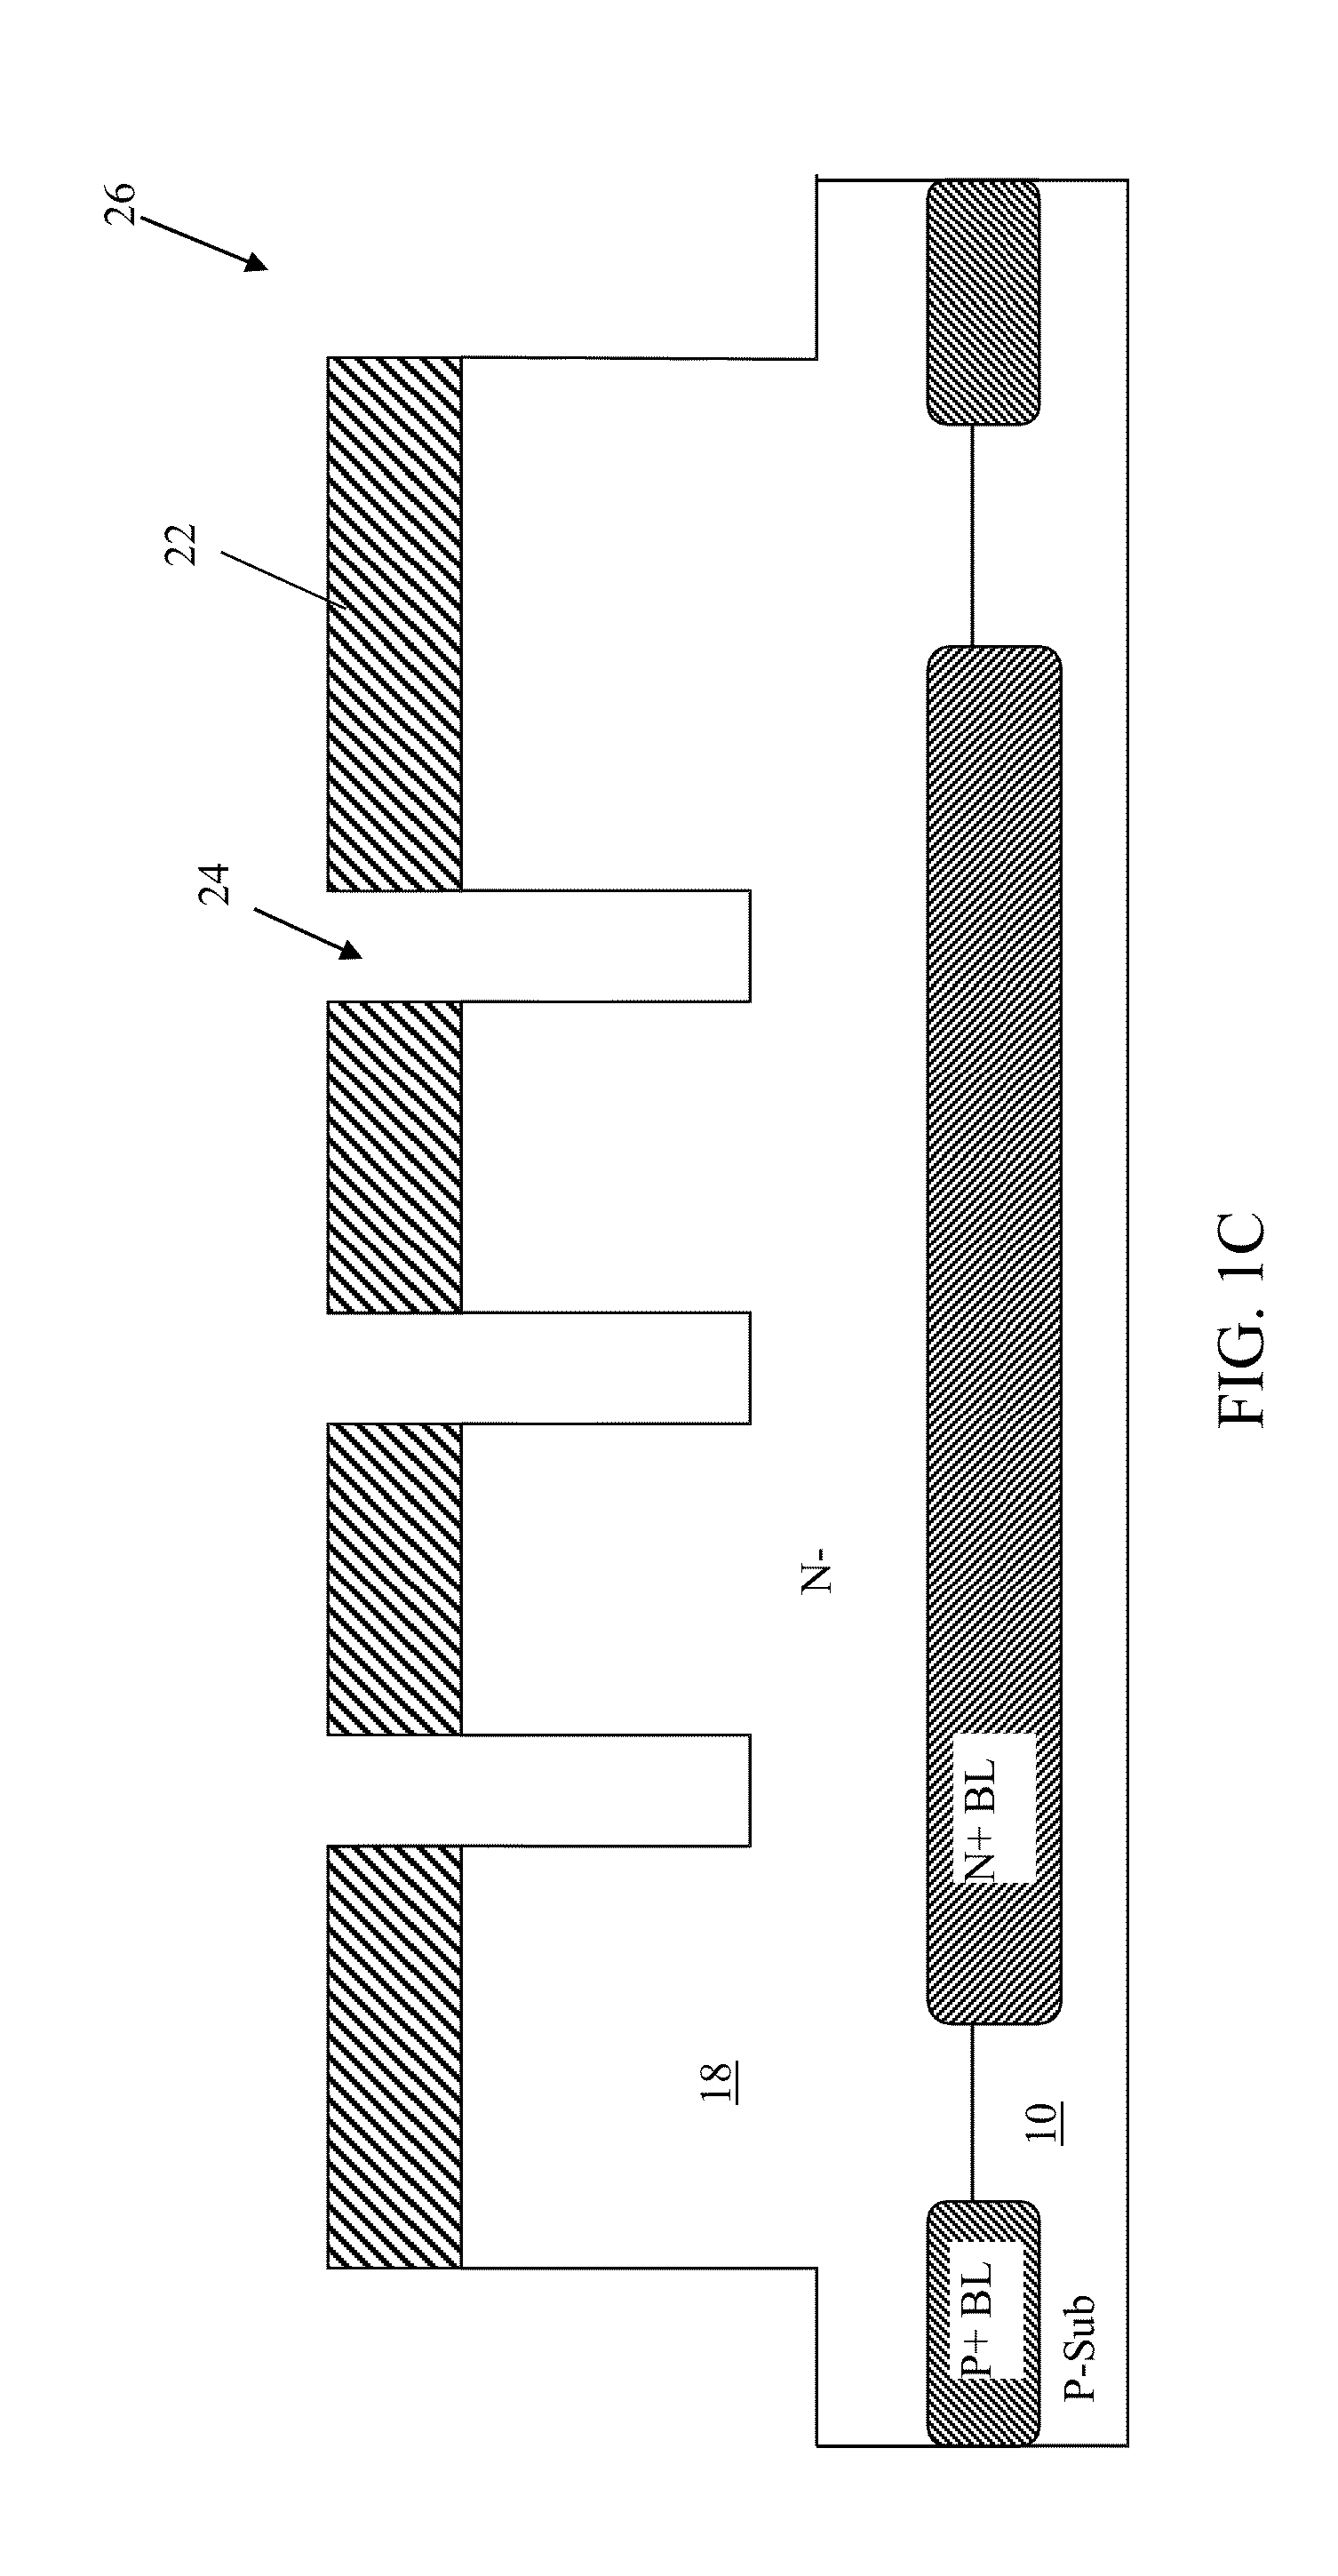 Lateral PNP Bipolar Transistor Formed with Multiple Epitaxial Layers